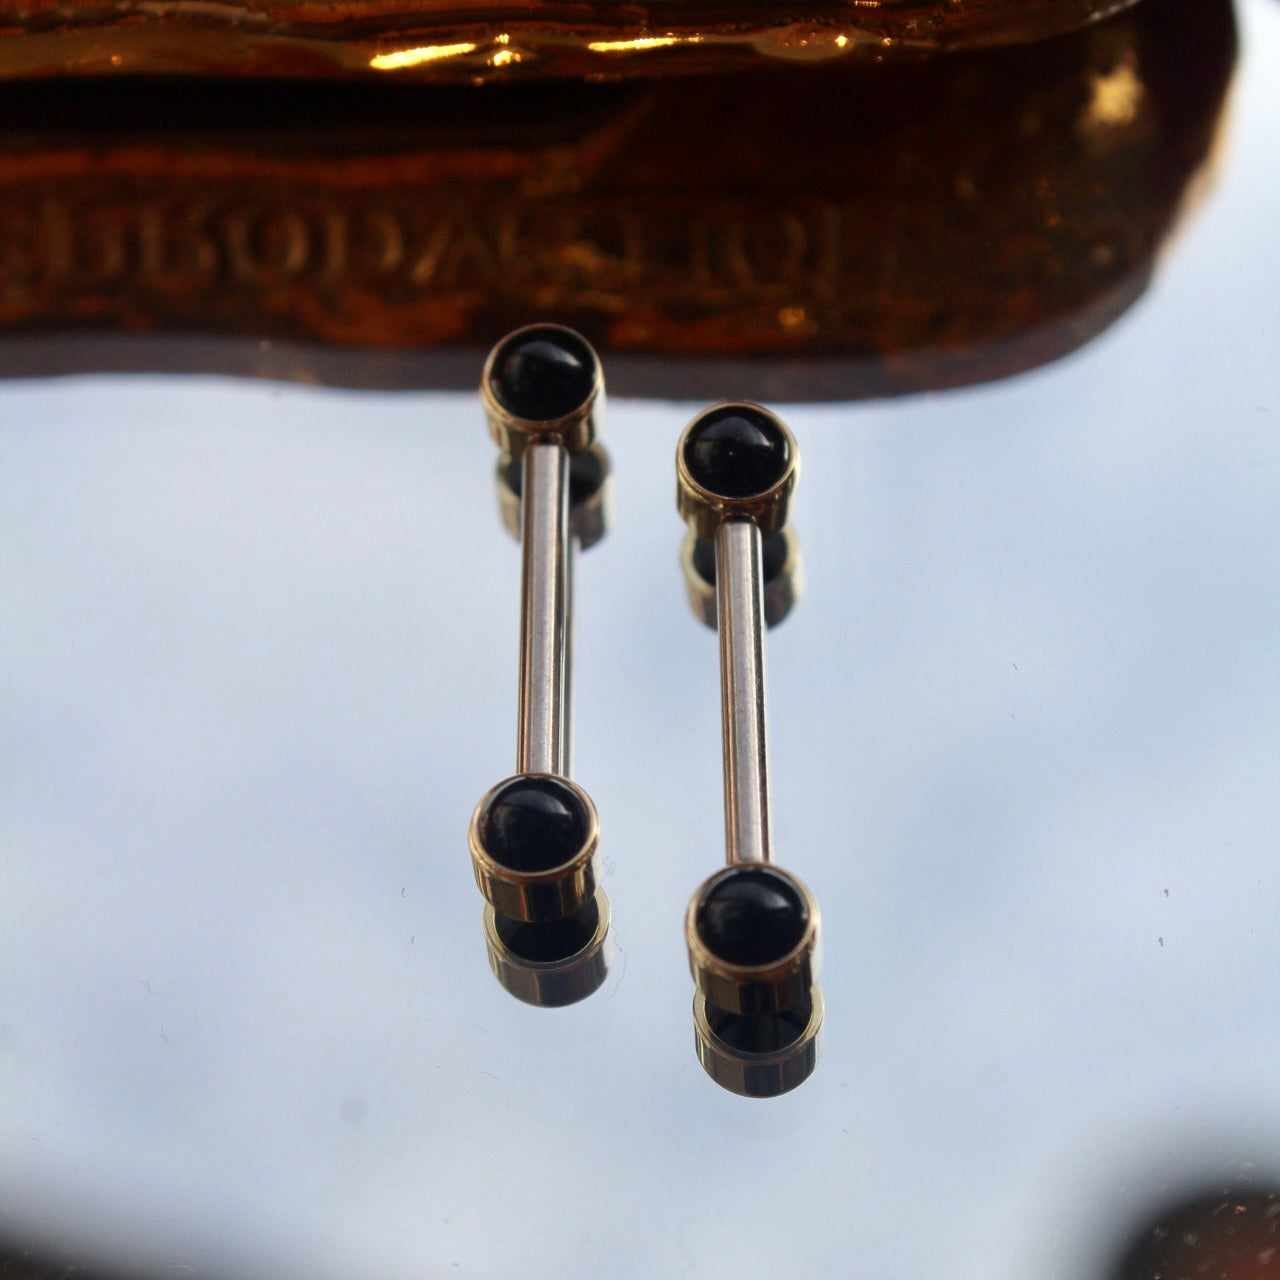 
                  
                    BVLA's "Bezel Side Pin" shown 4 times in 14k Yellow gold with onyx, 2 each attached to 2 Anatometal "Straight Barbell" in titanium. Shown on a background featuring a mirror and a small golden piece on the top
                  
                